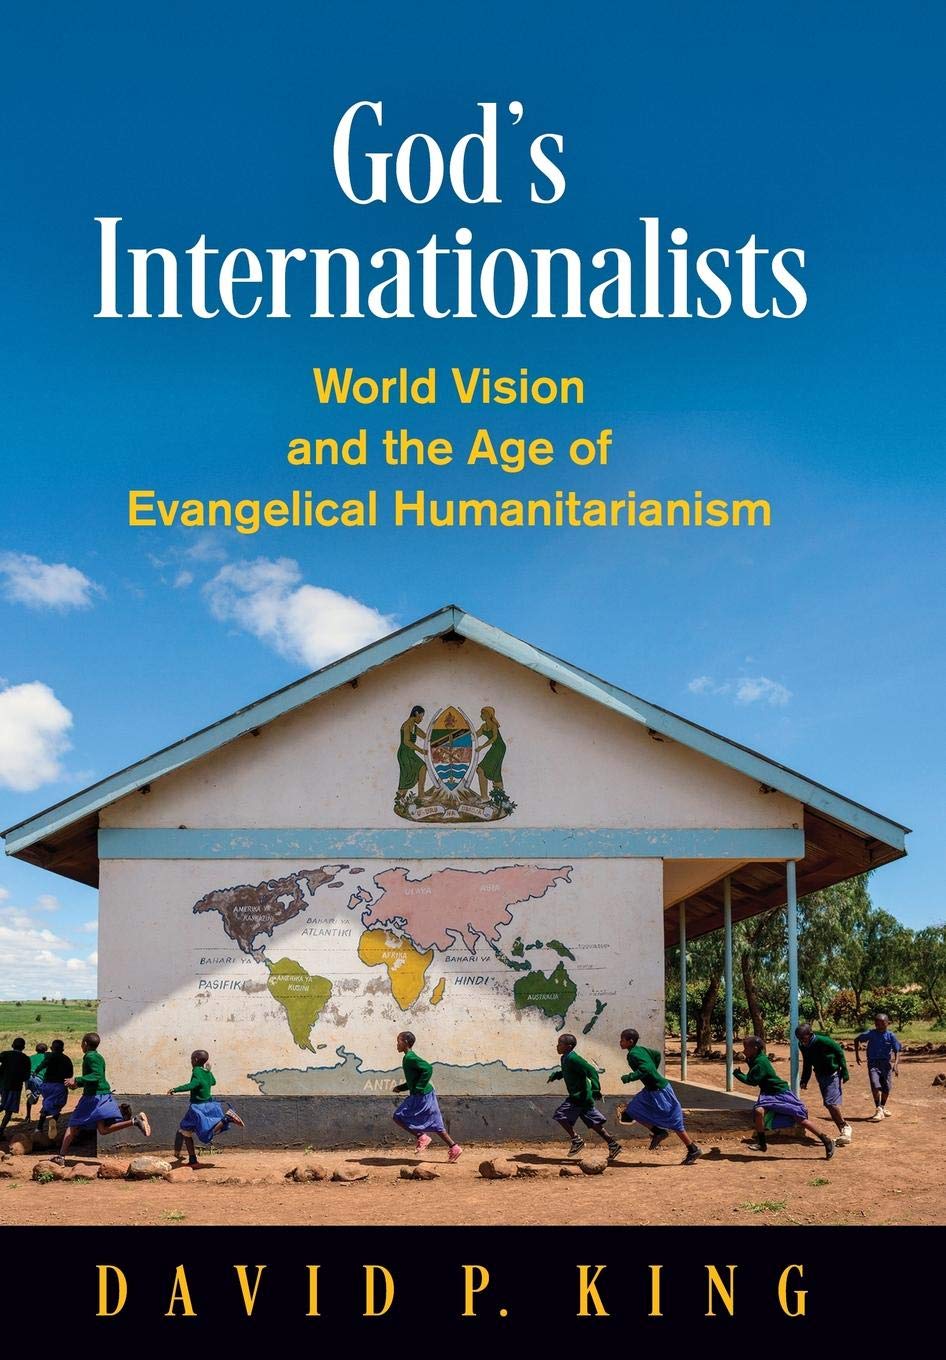 God’s Internationalists: World Vision and the Age of Evangelical Humanitarianism